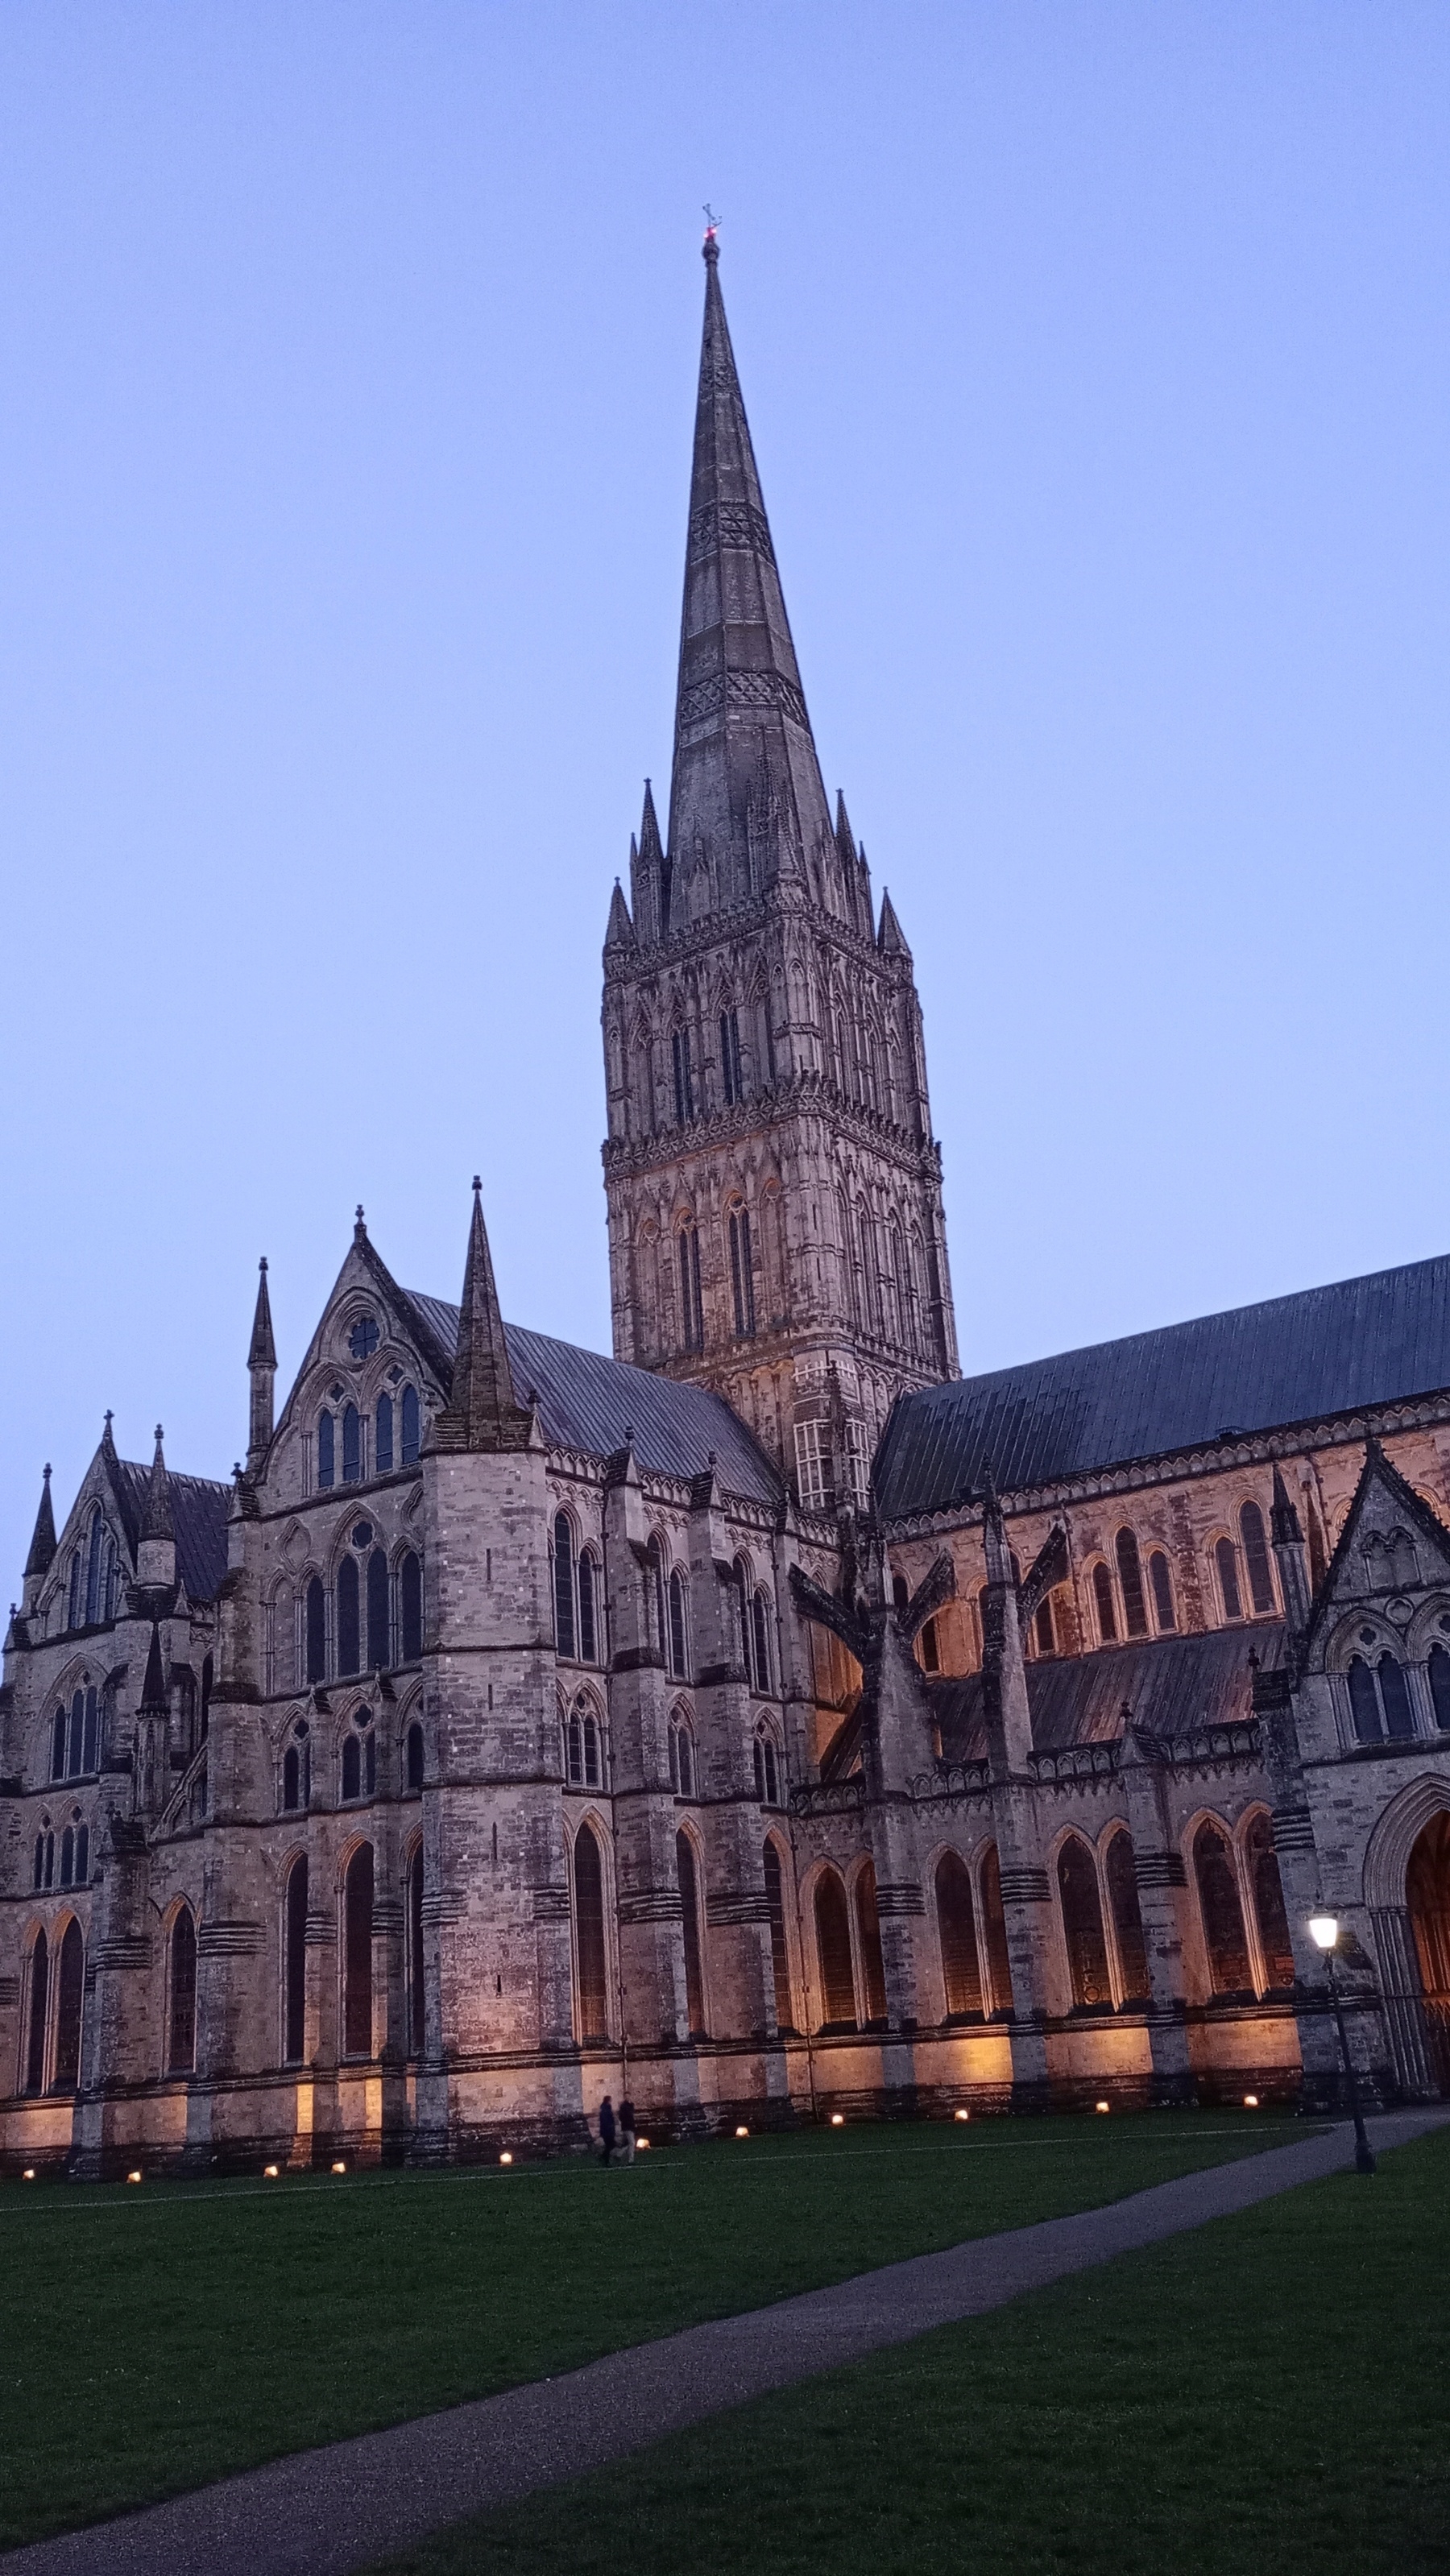 Salisbury cathedral this evening